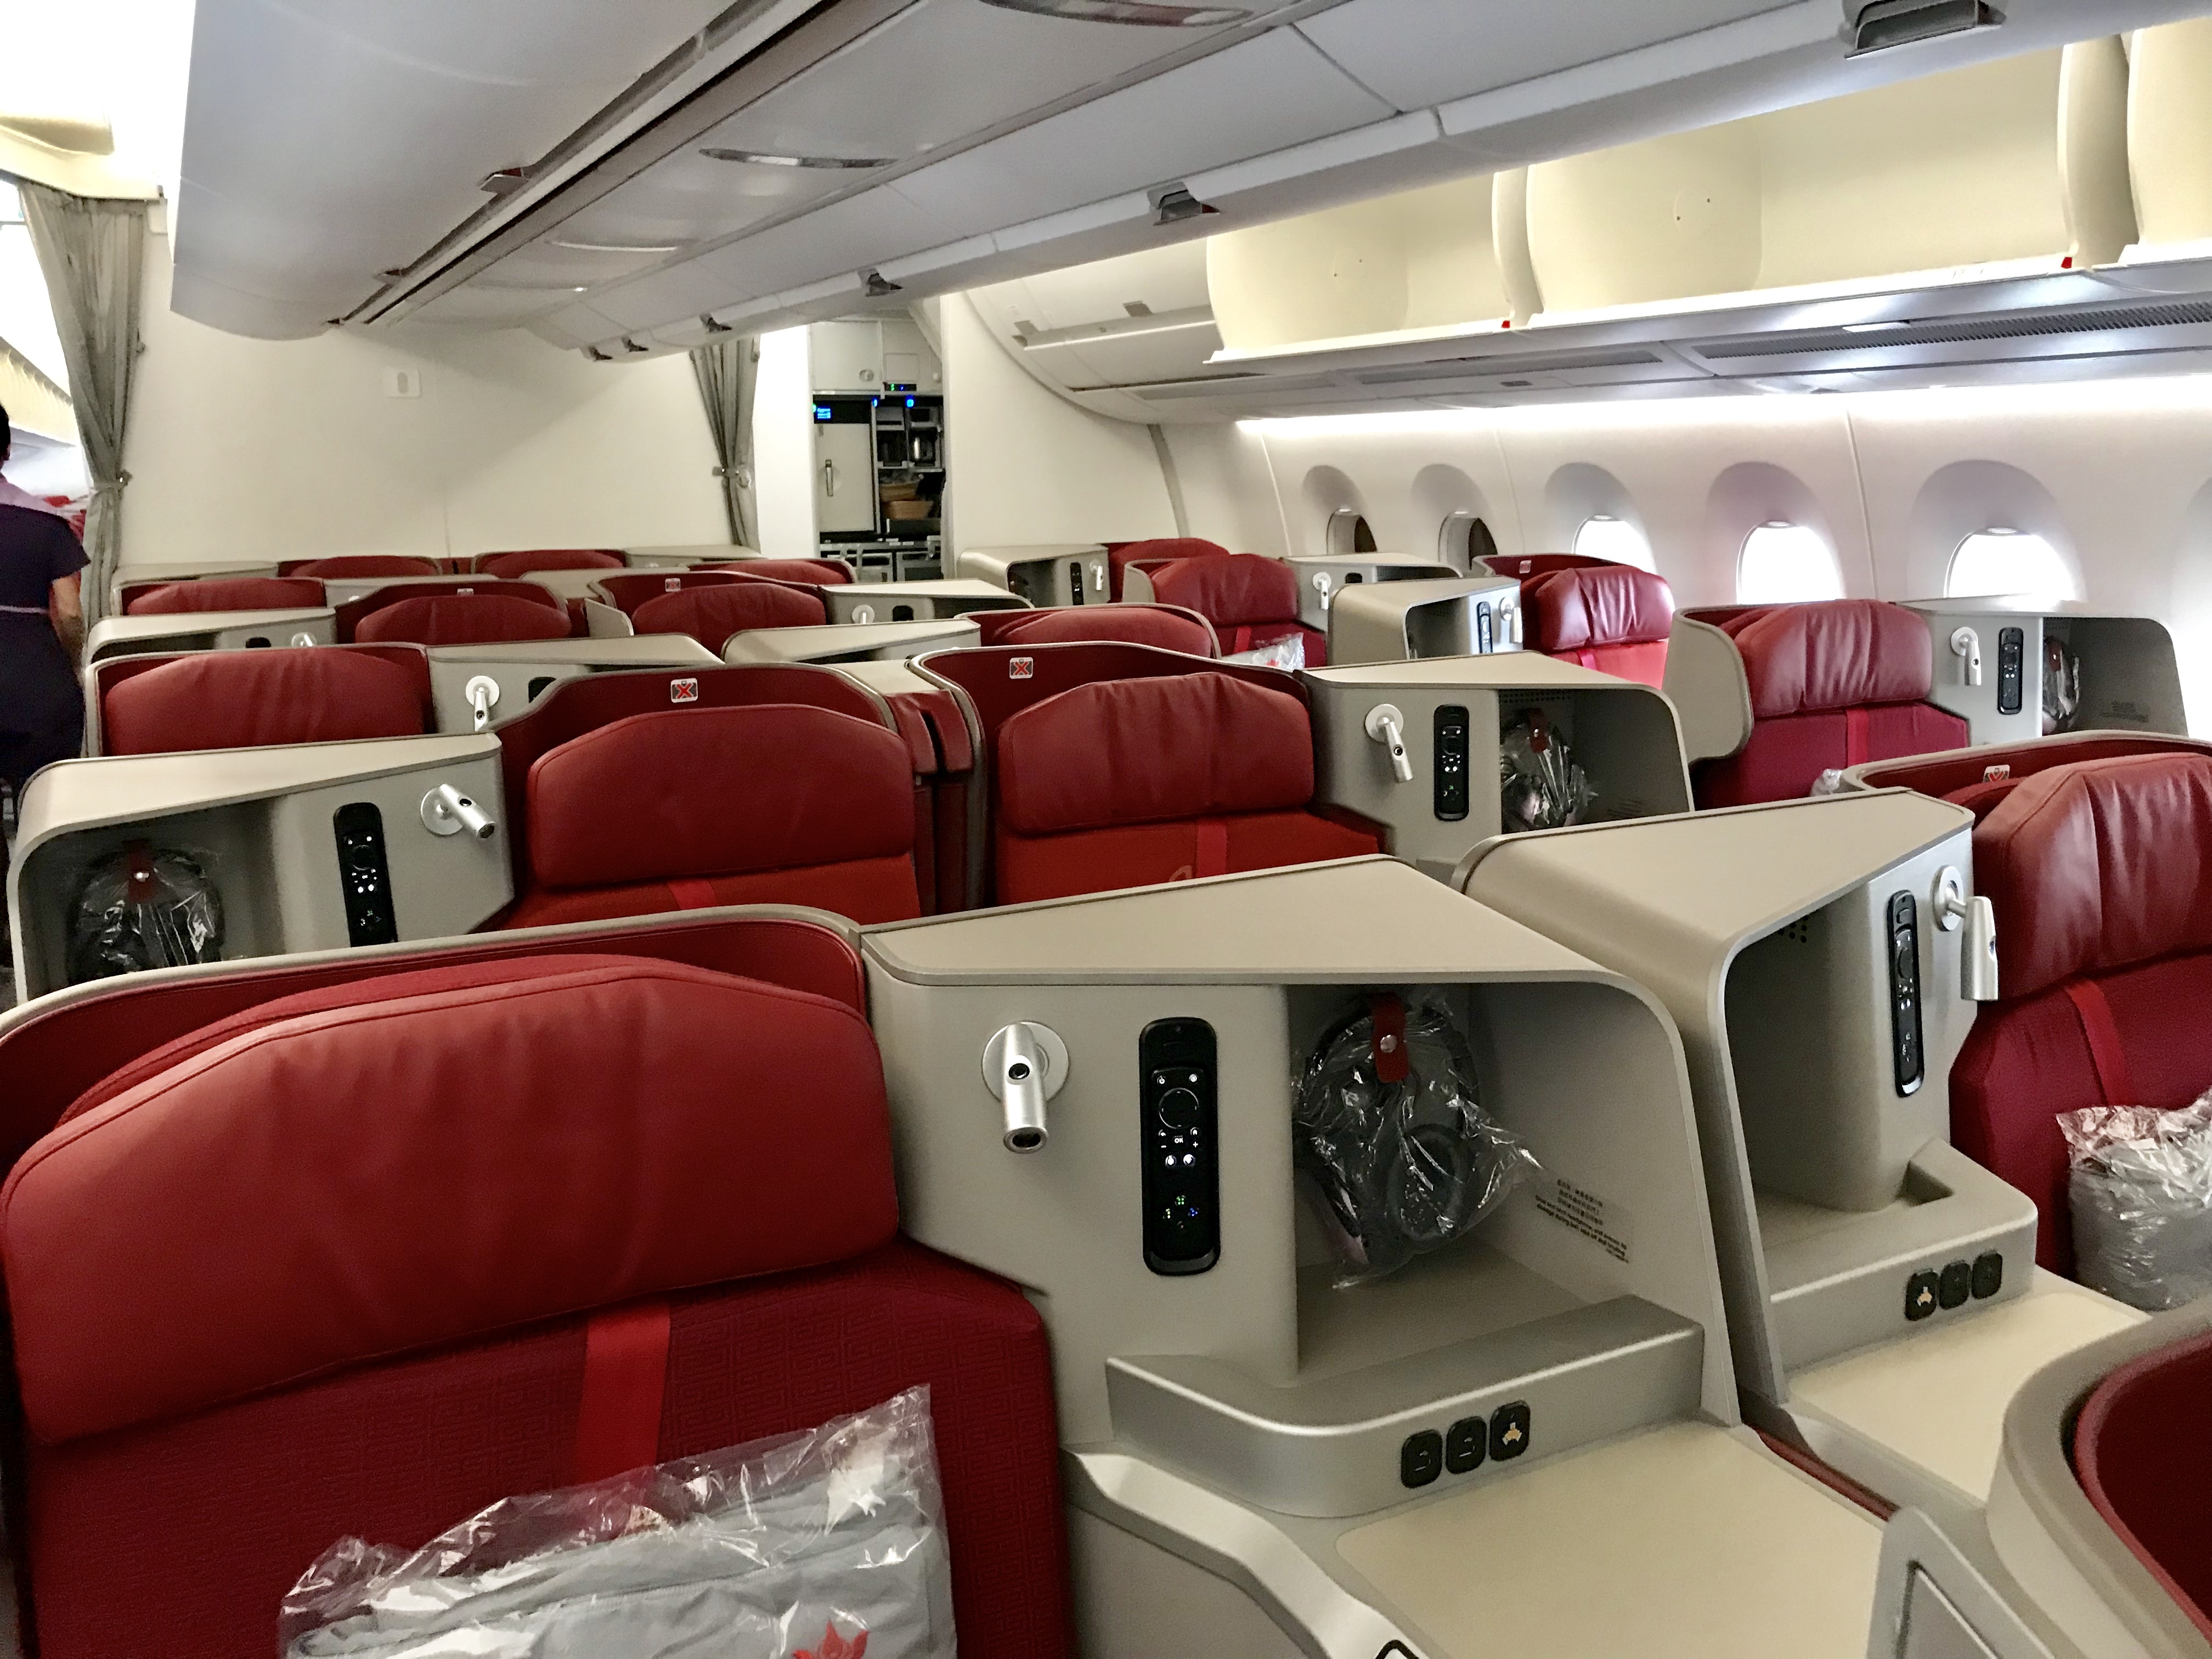 Hong Kong Airlines Terminates 170 Employees And Offers Only Water On Board Samchui Com